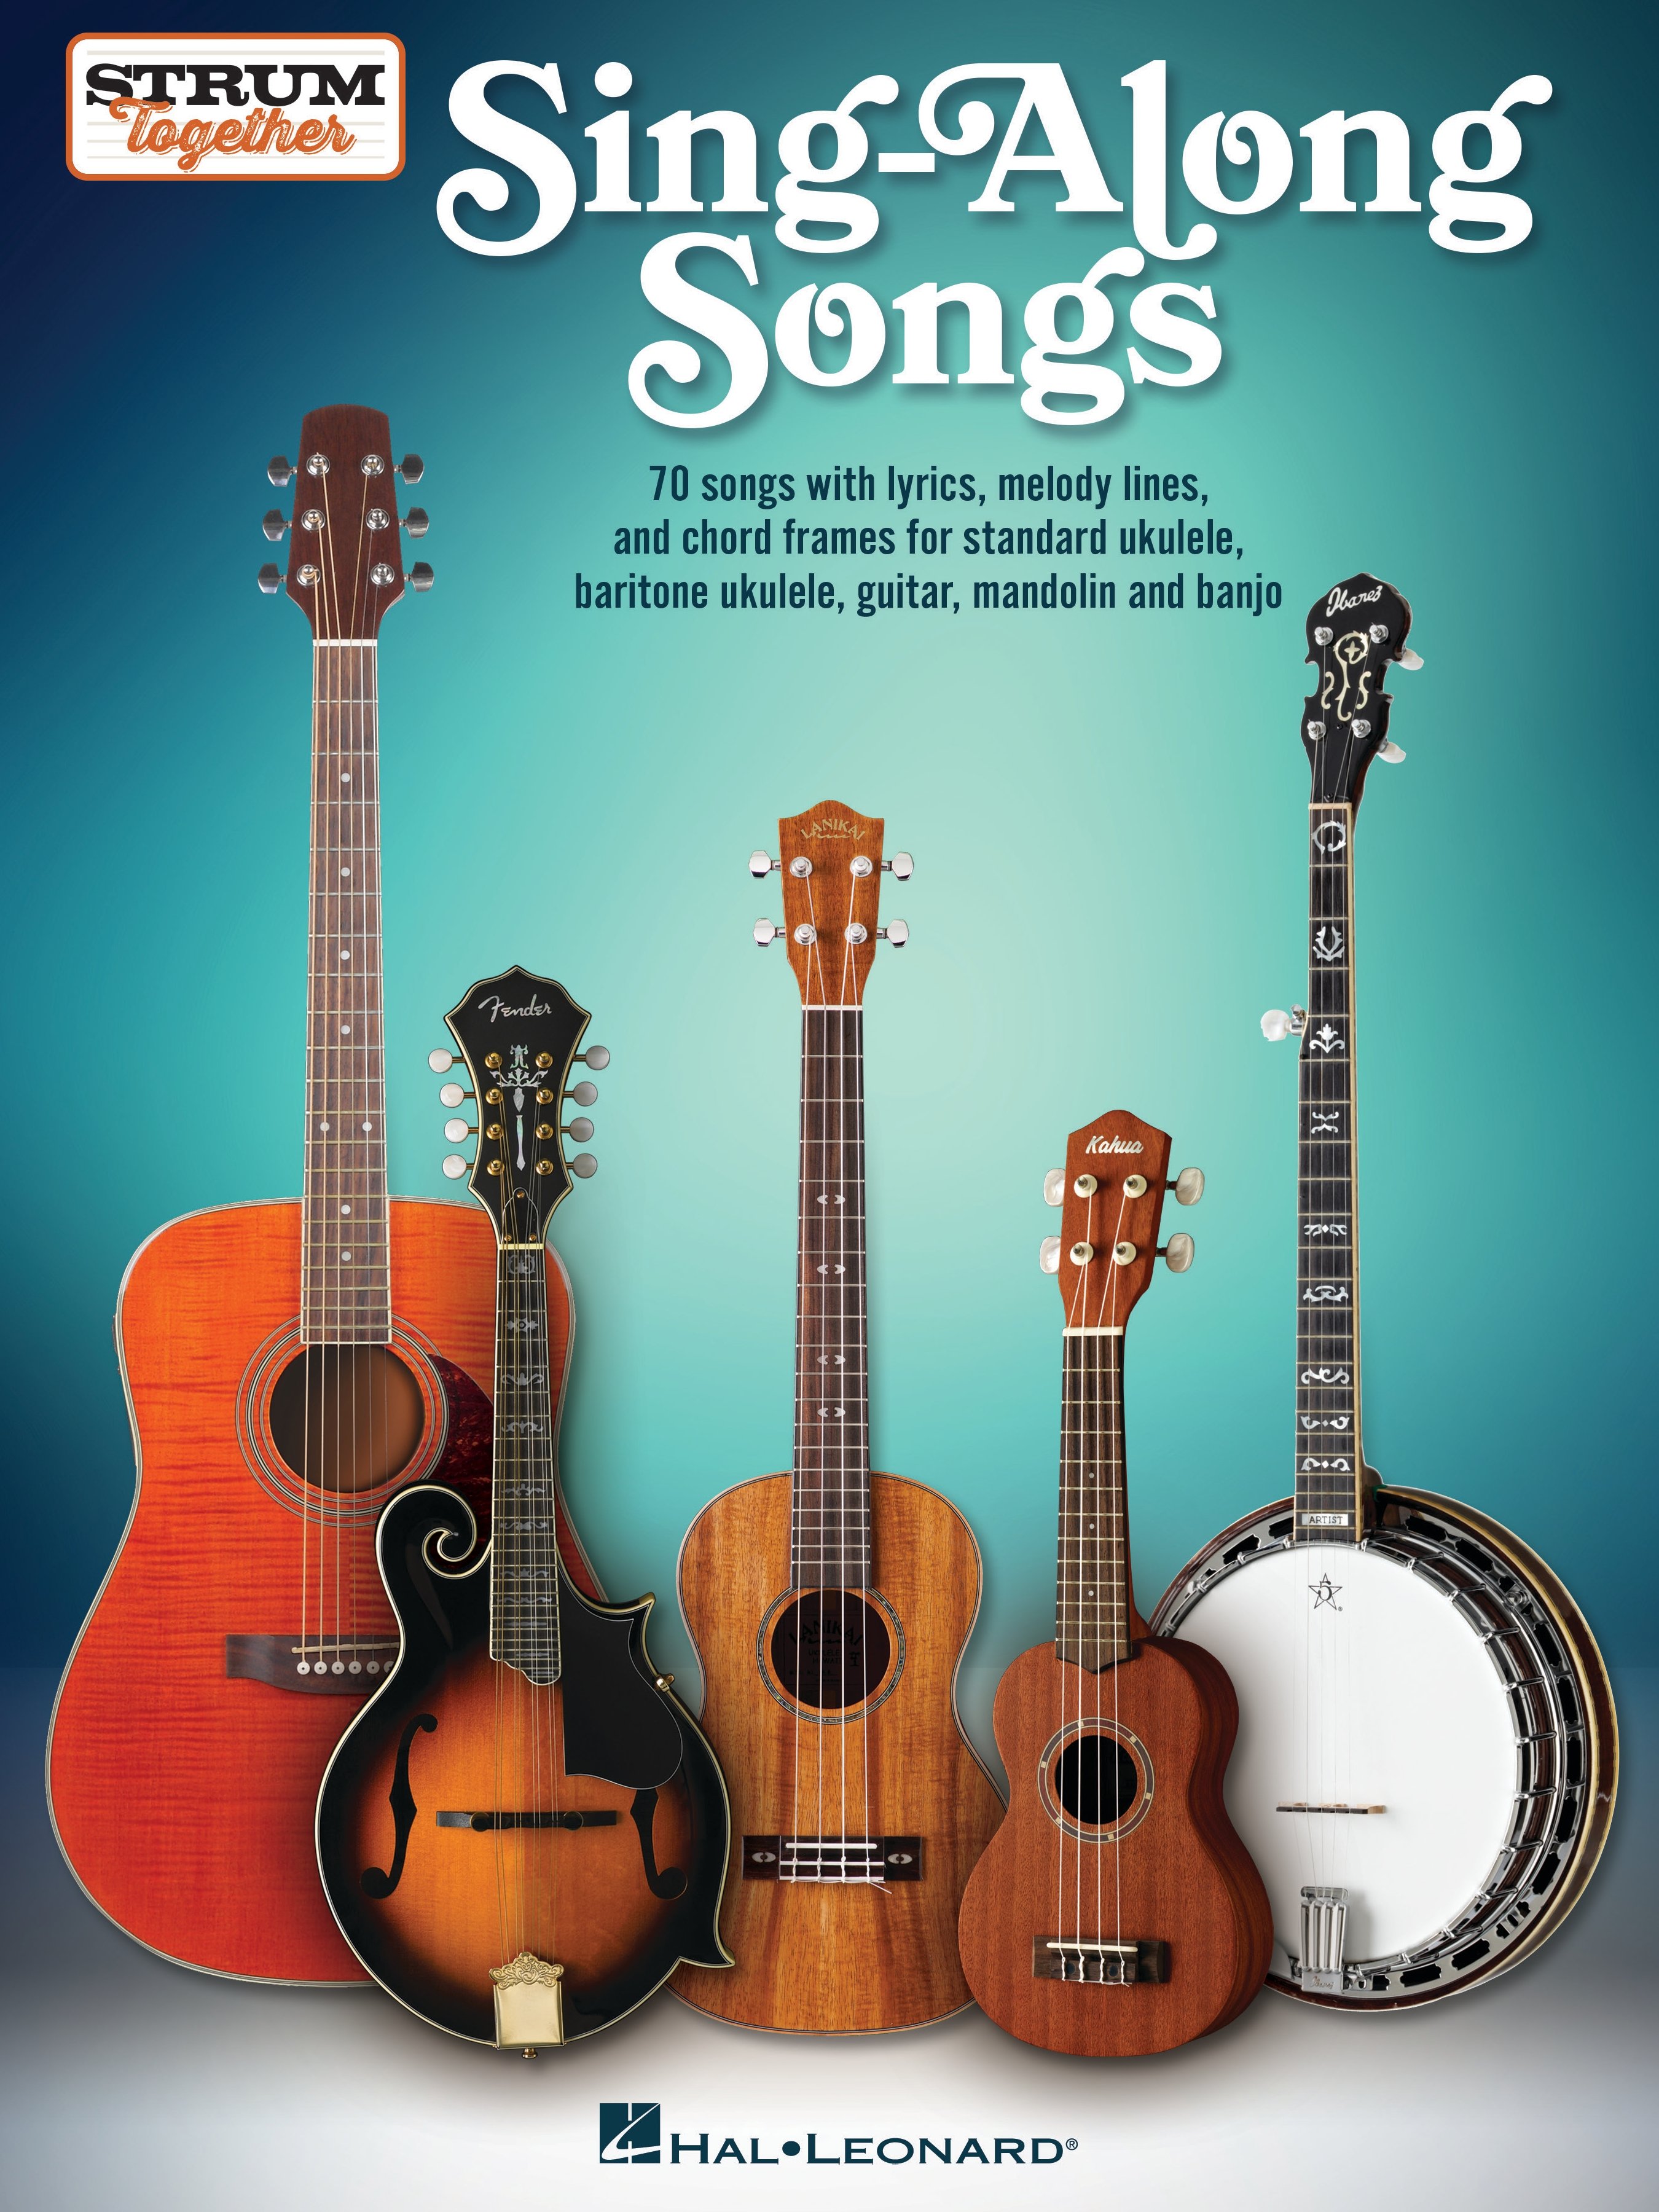 Sing-Along Songs: Strum Together